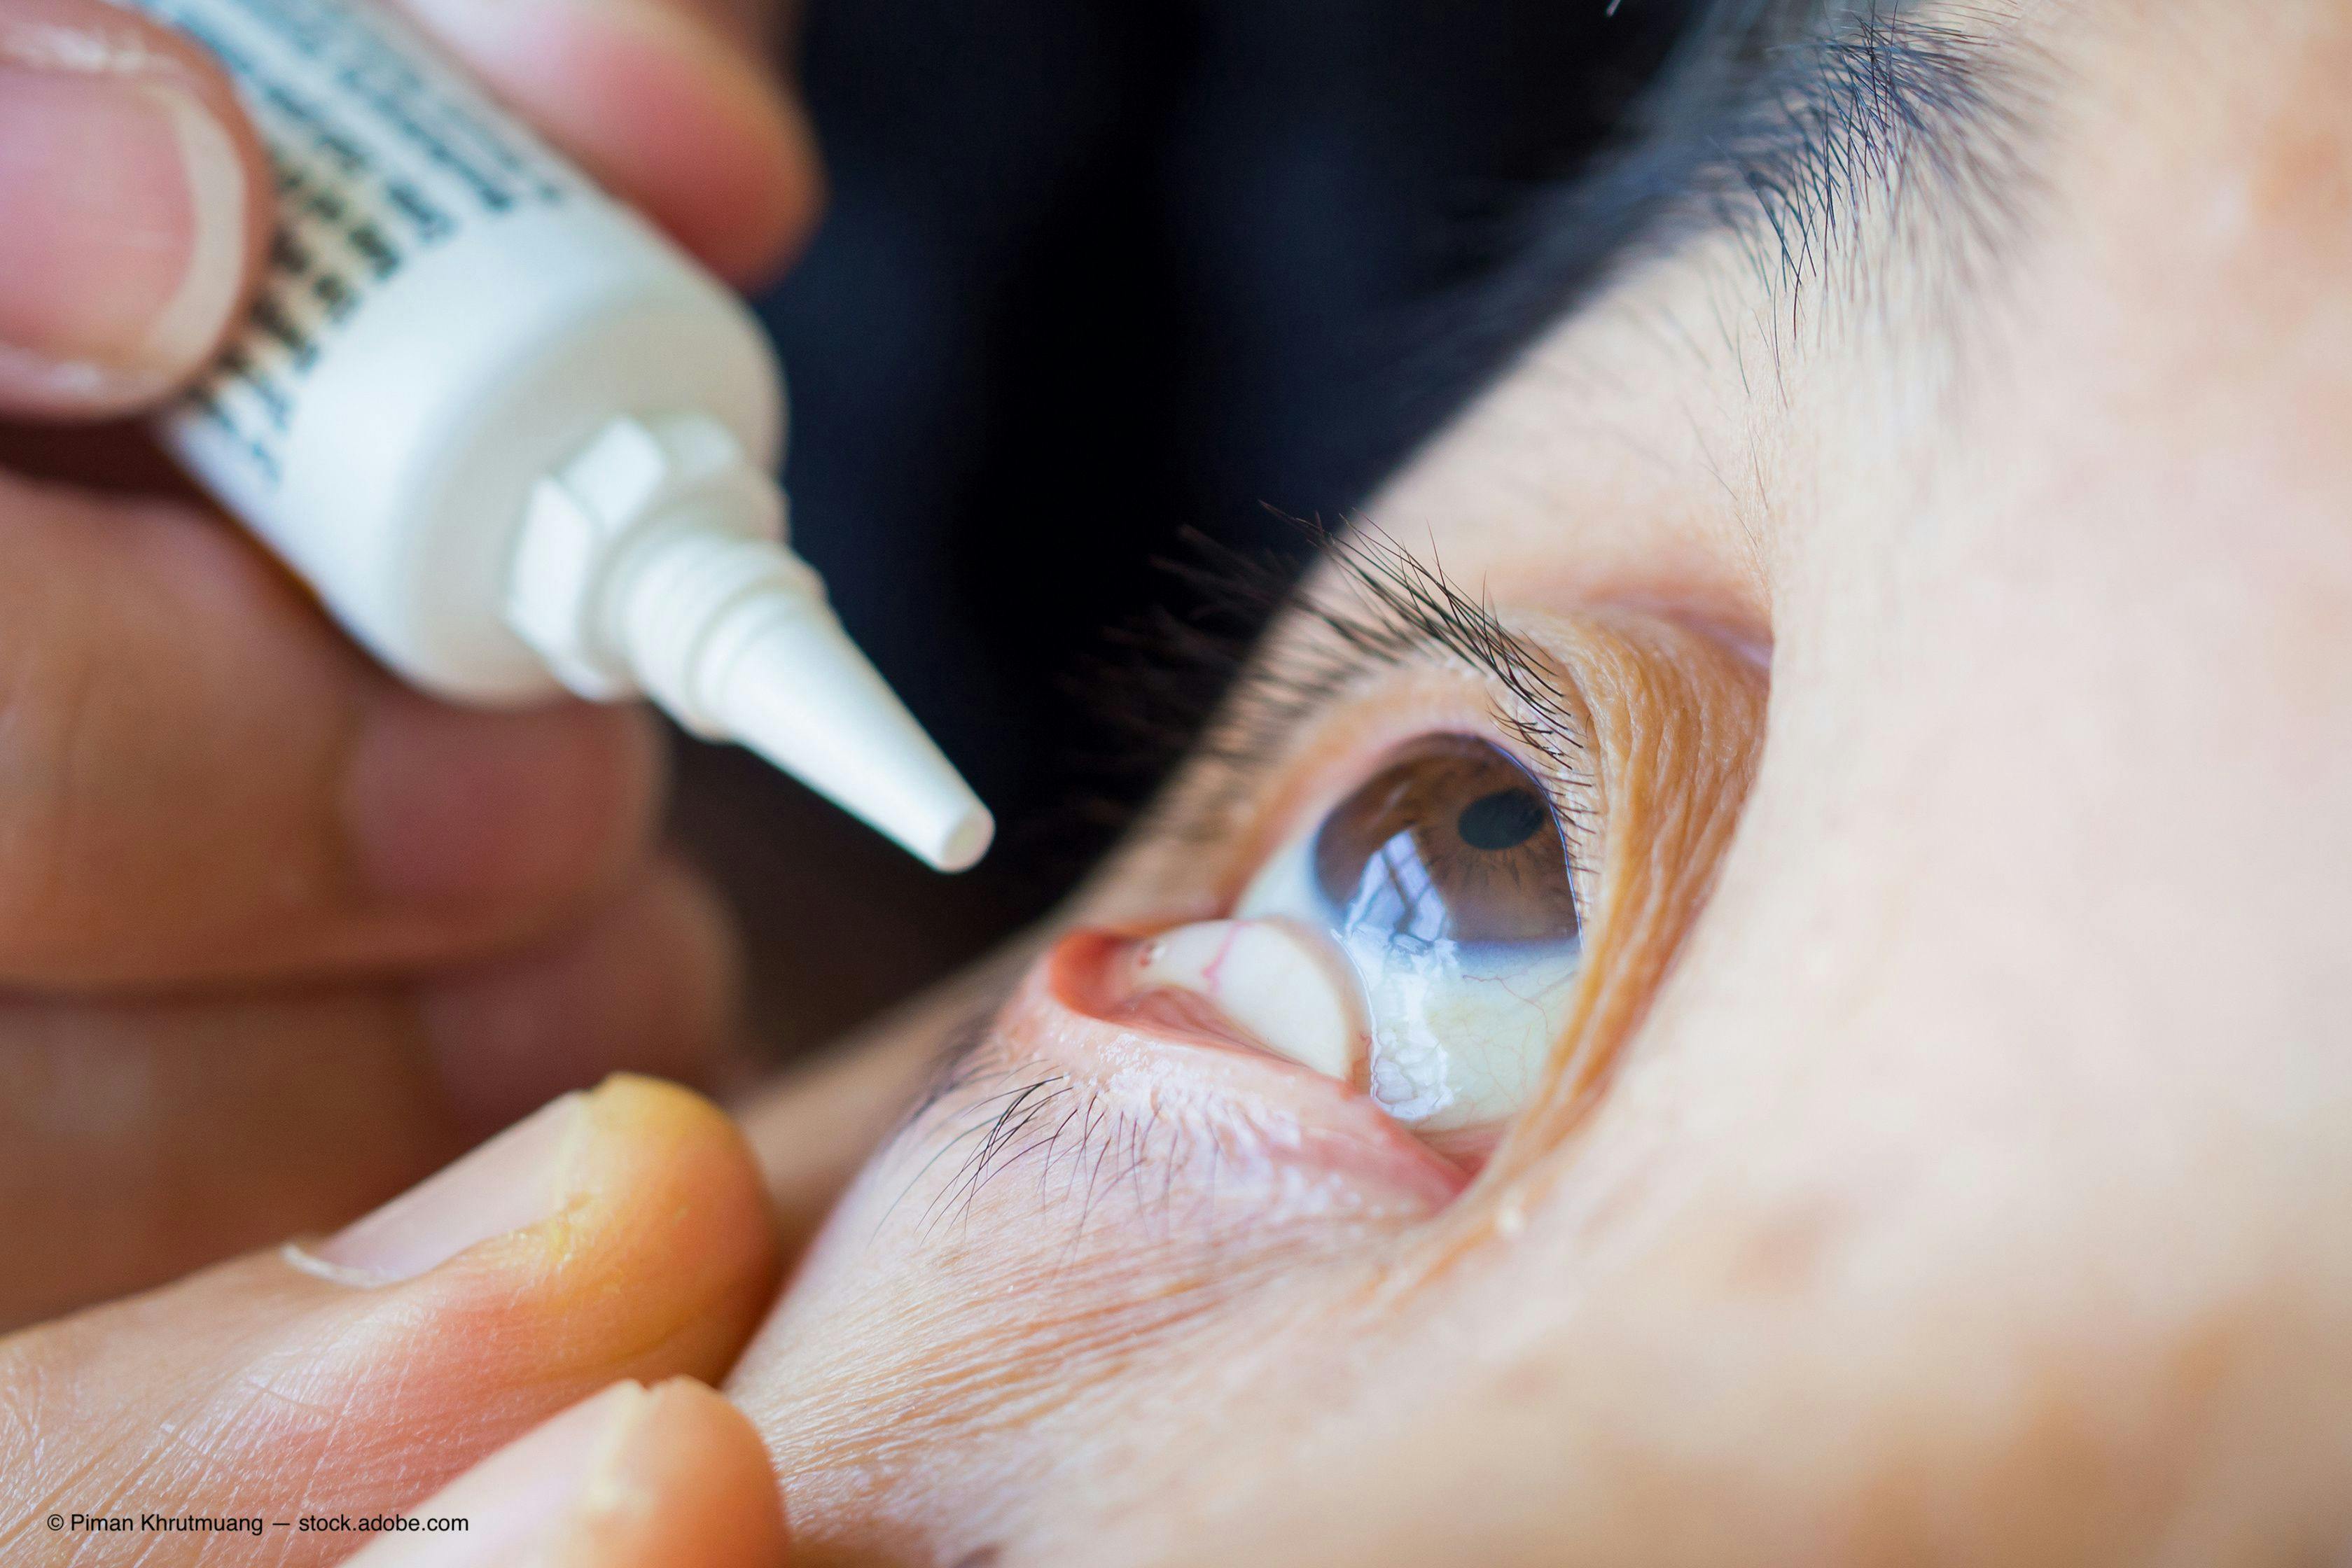 Glaucoma and dry eye present double trouble for patients, ophthalmologists